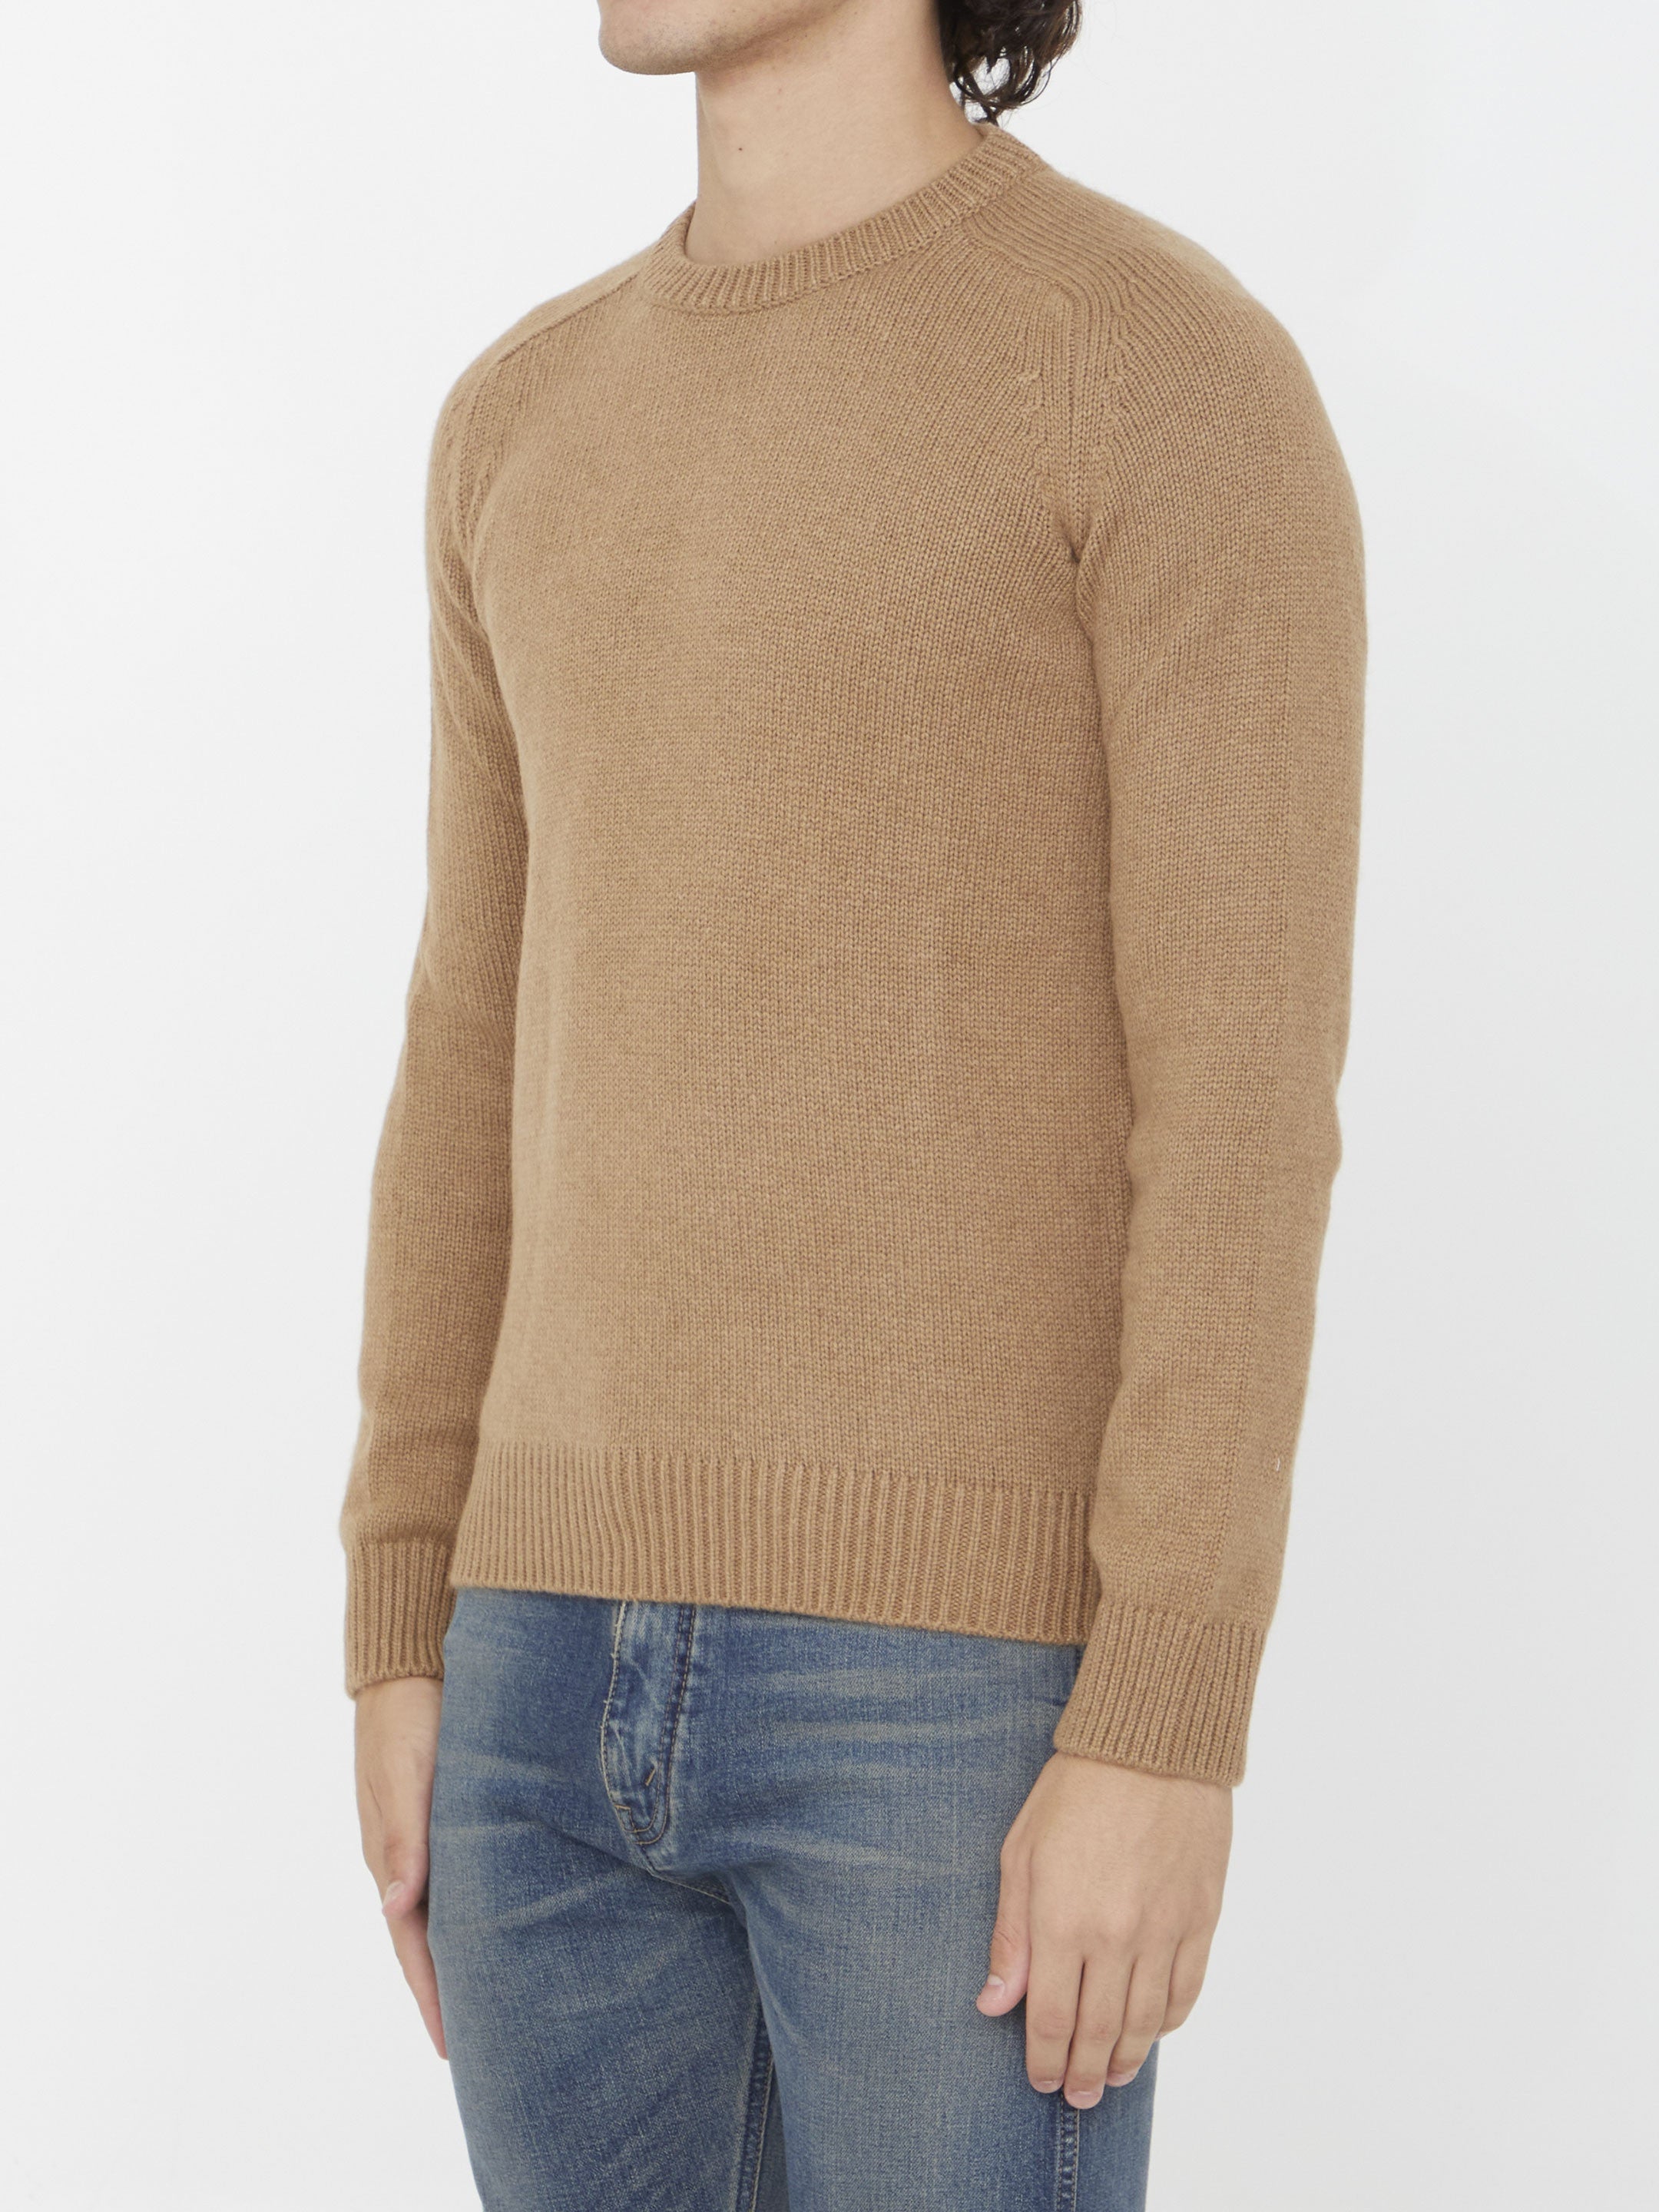 SAINT-LAURENT-OUTLET-SALE-Wool-sweater-Strick-ARCHIVE-COLLECTION-2.jpg